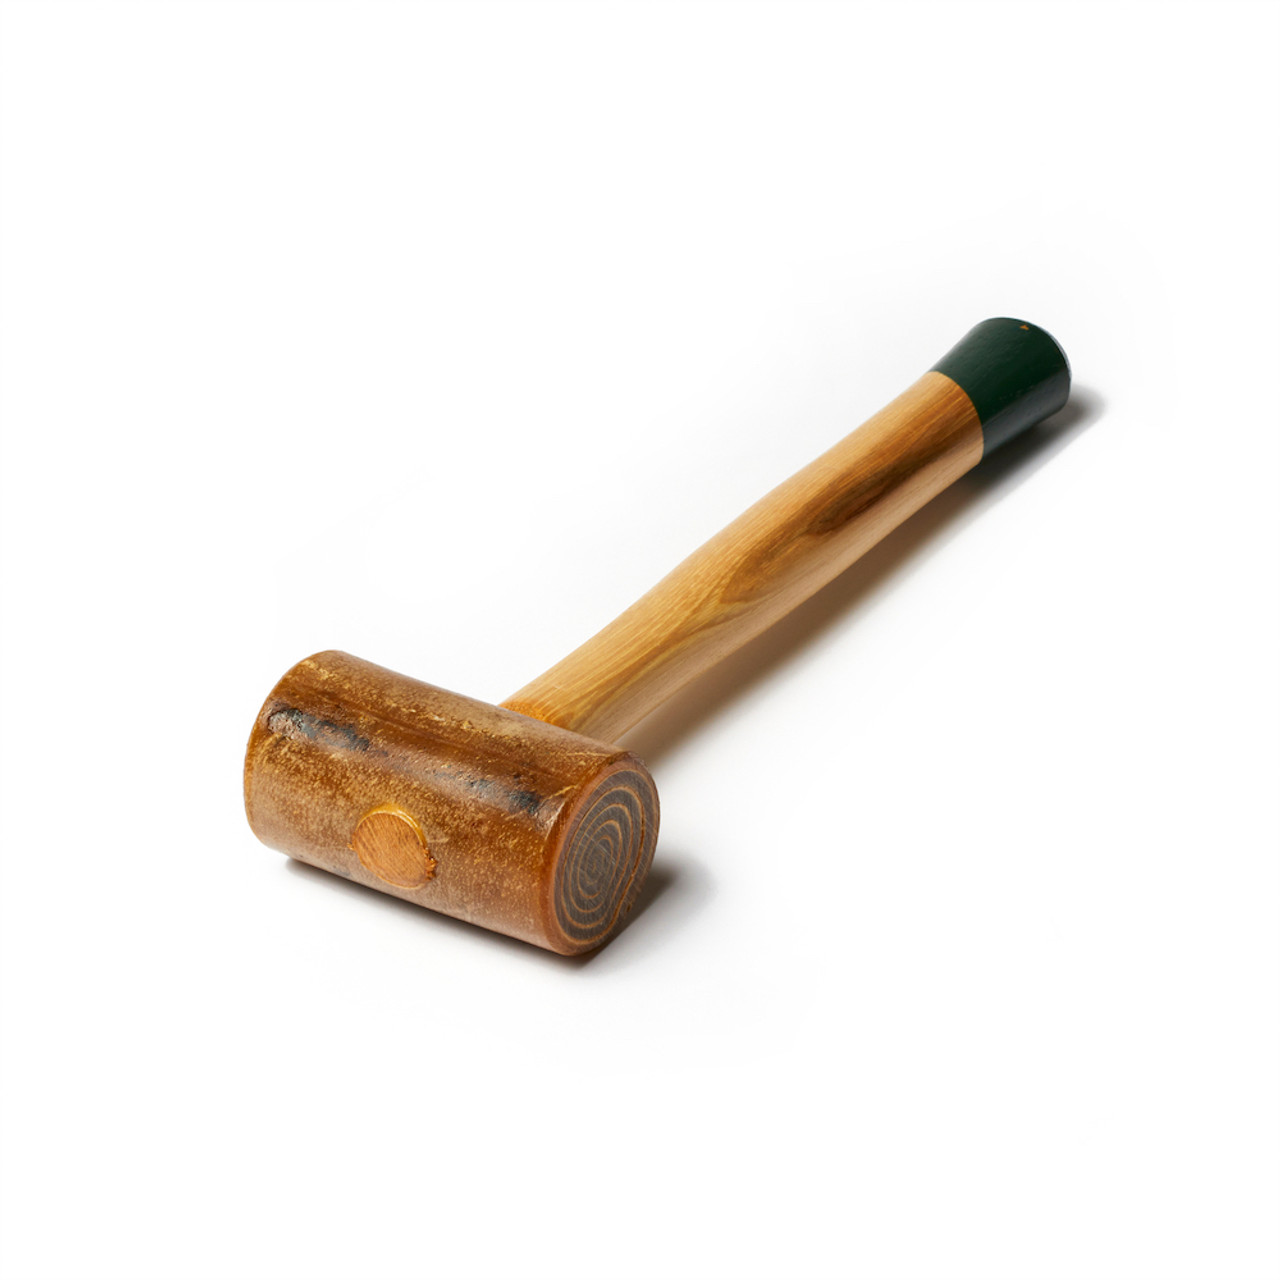 Rawhide Mallets | by Tarps Now